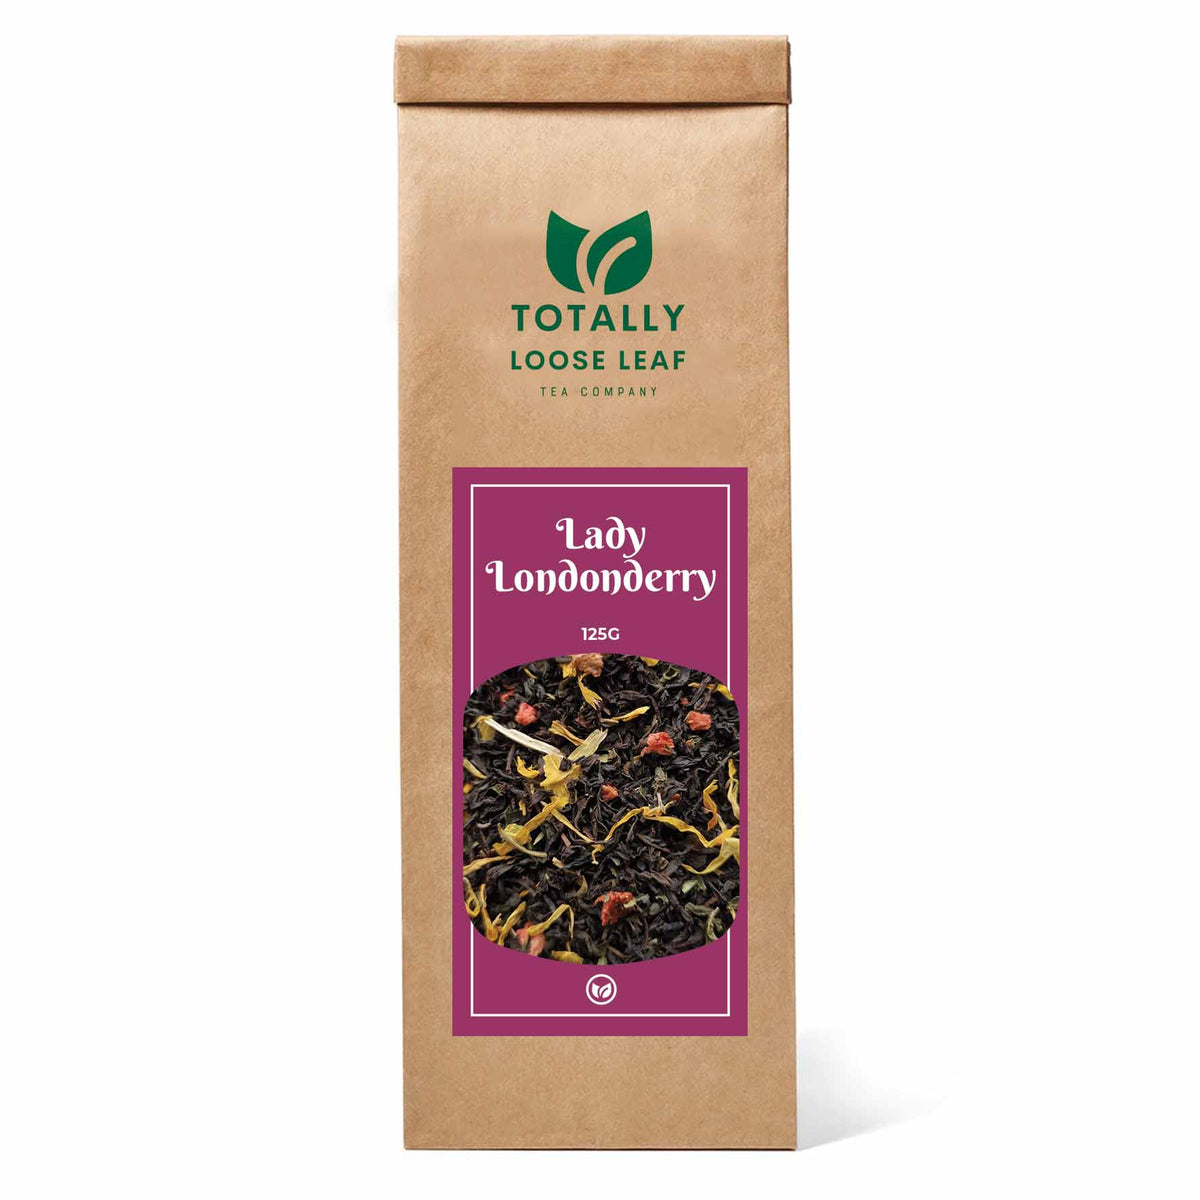 Lady Londonderry Afternoon Loose Leaf Tea - one pouch